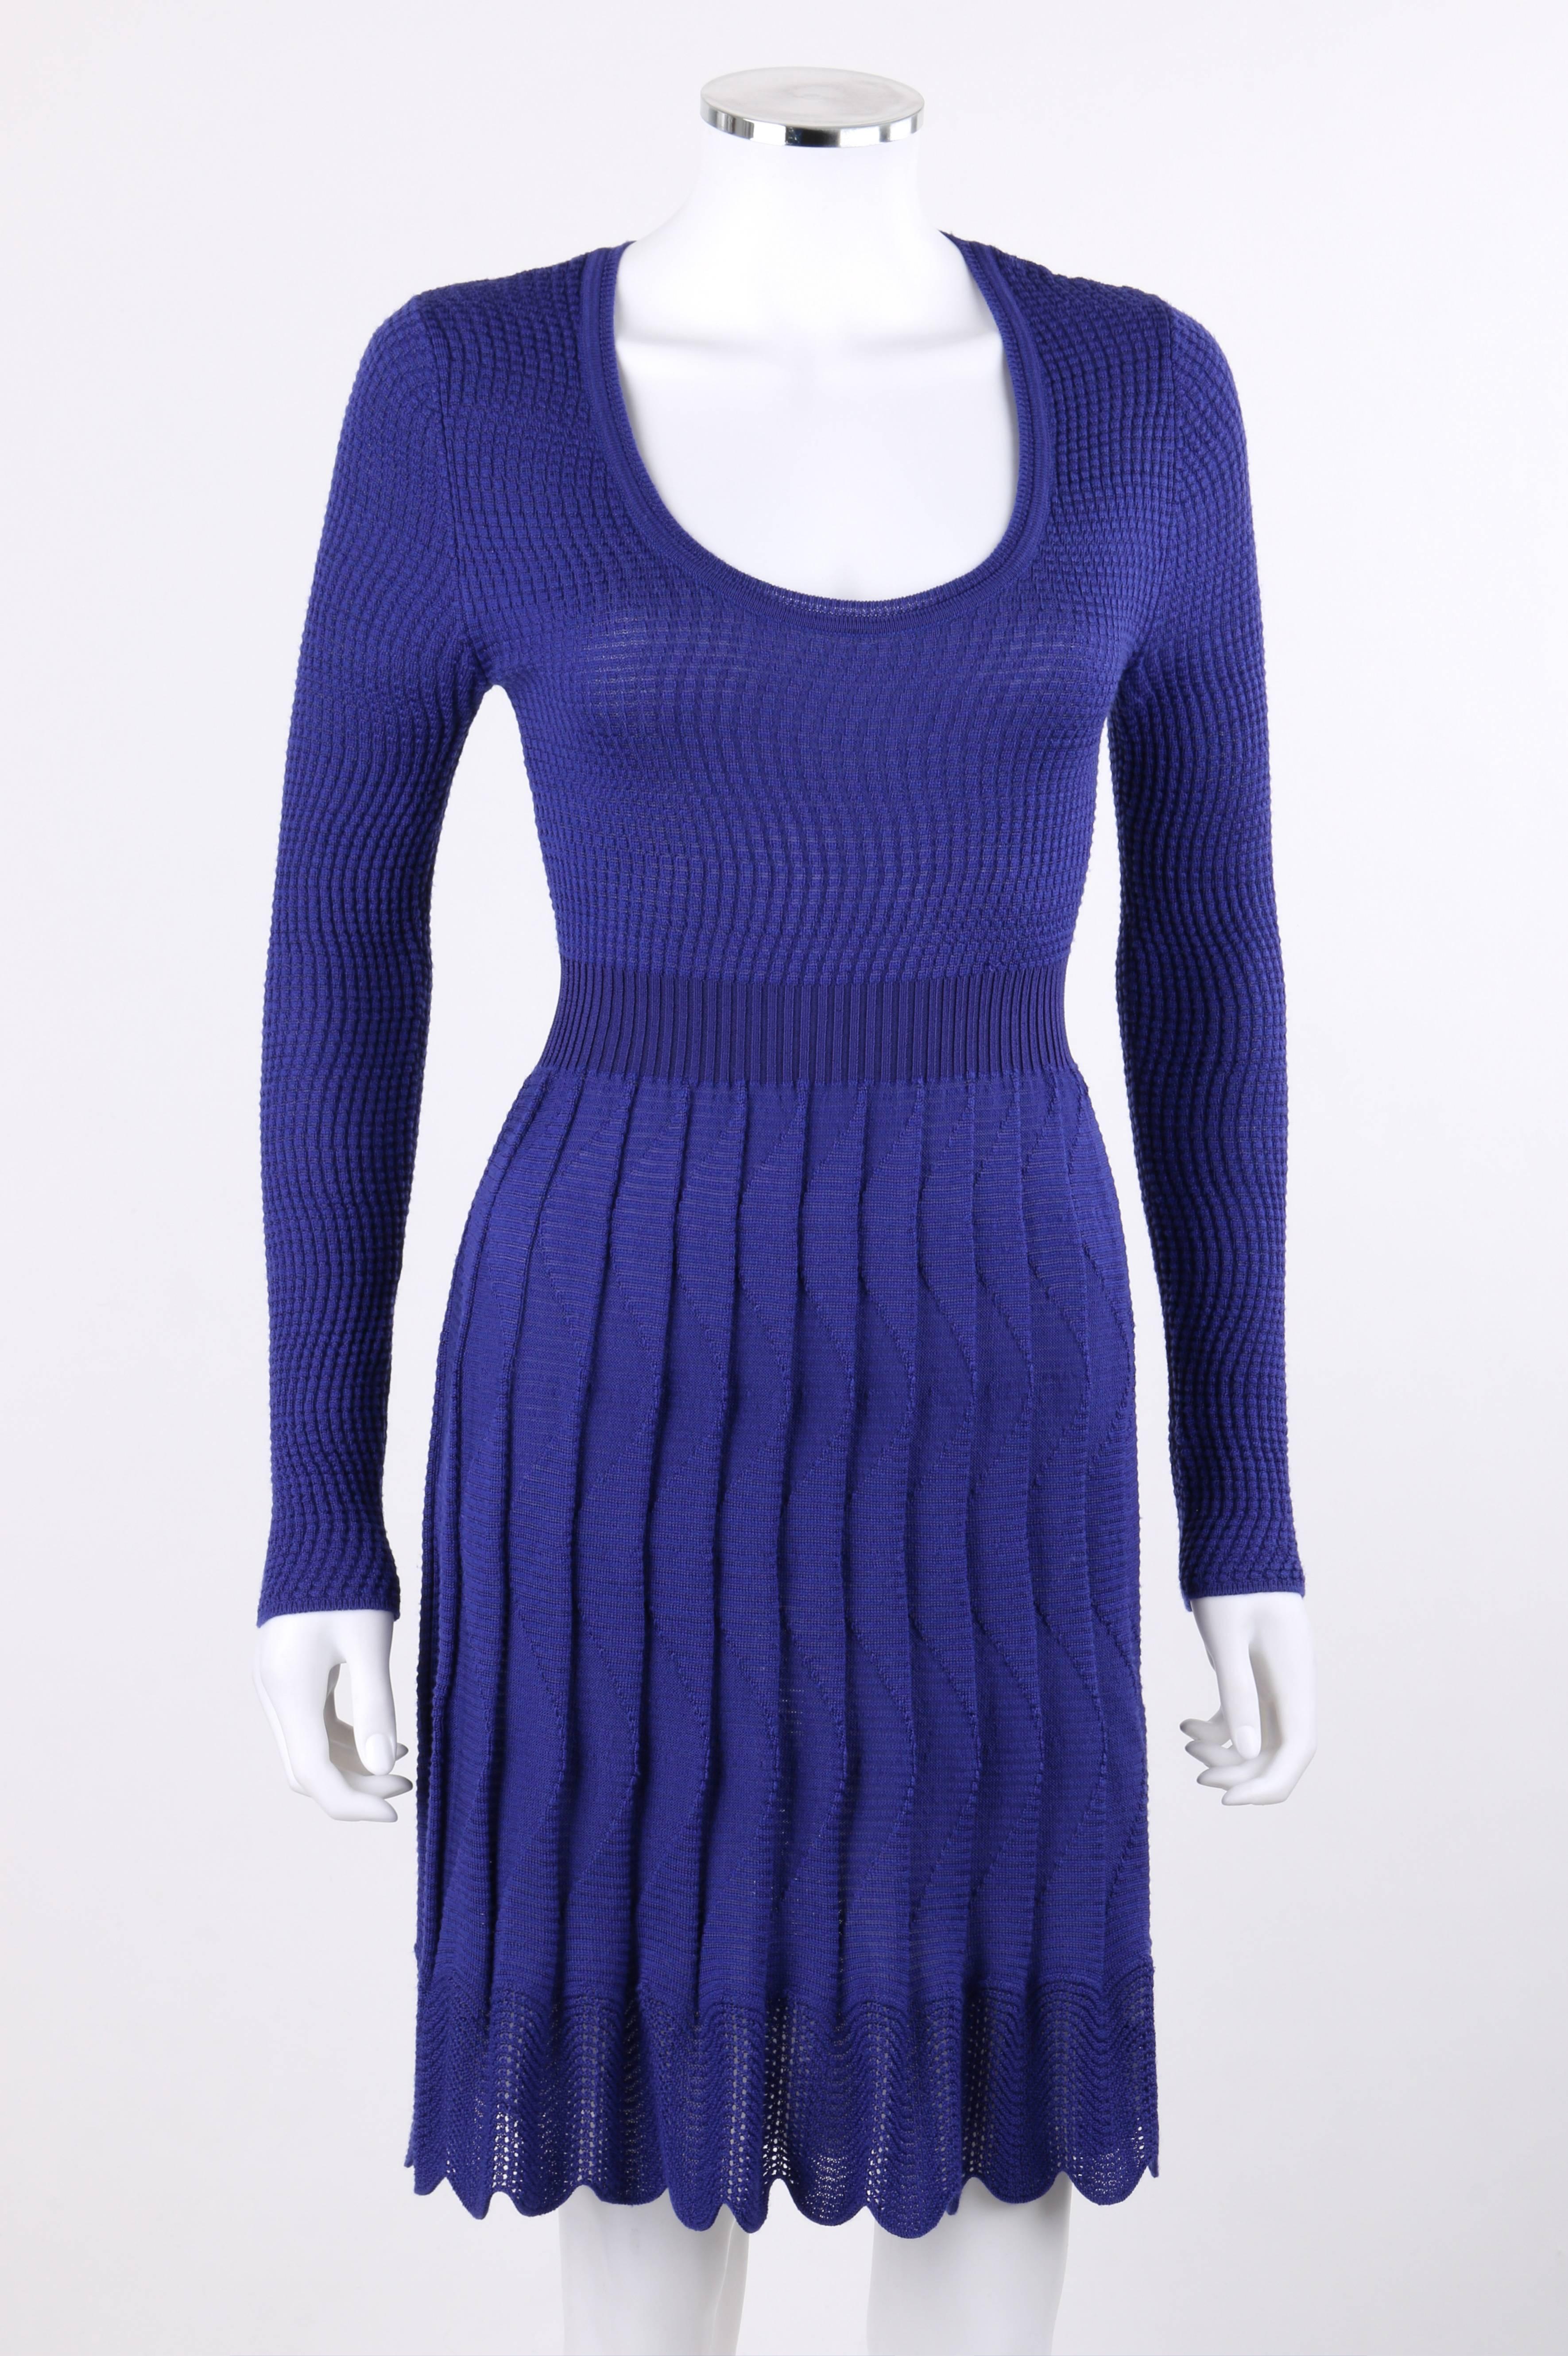 Missoni royal blue (with a hint of purple) wool rib knit long sleeve pleated shift dress. Designed by Angela Missoni. Wave patterned rib knit bodice. Long sleeves. Scoop neckline. Rib knit banded waistline. Knife pleated skirt with scalloped